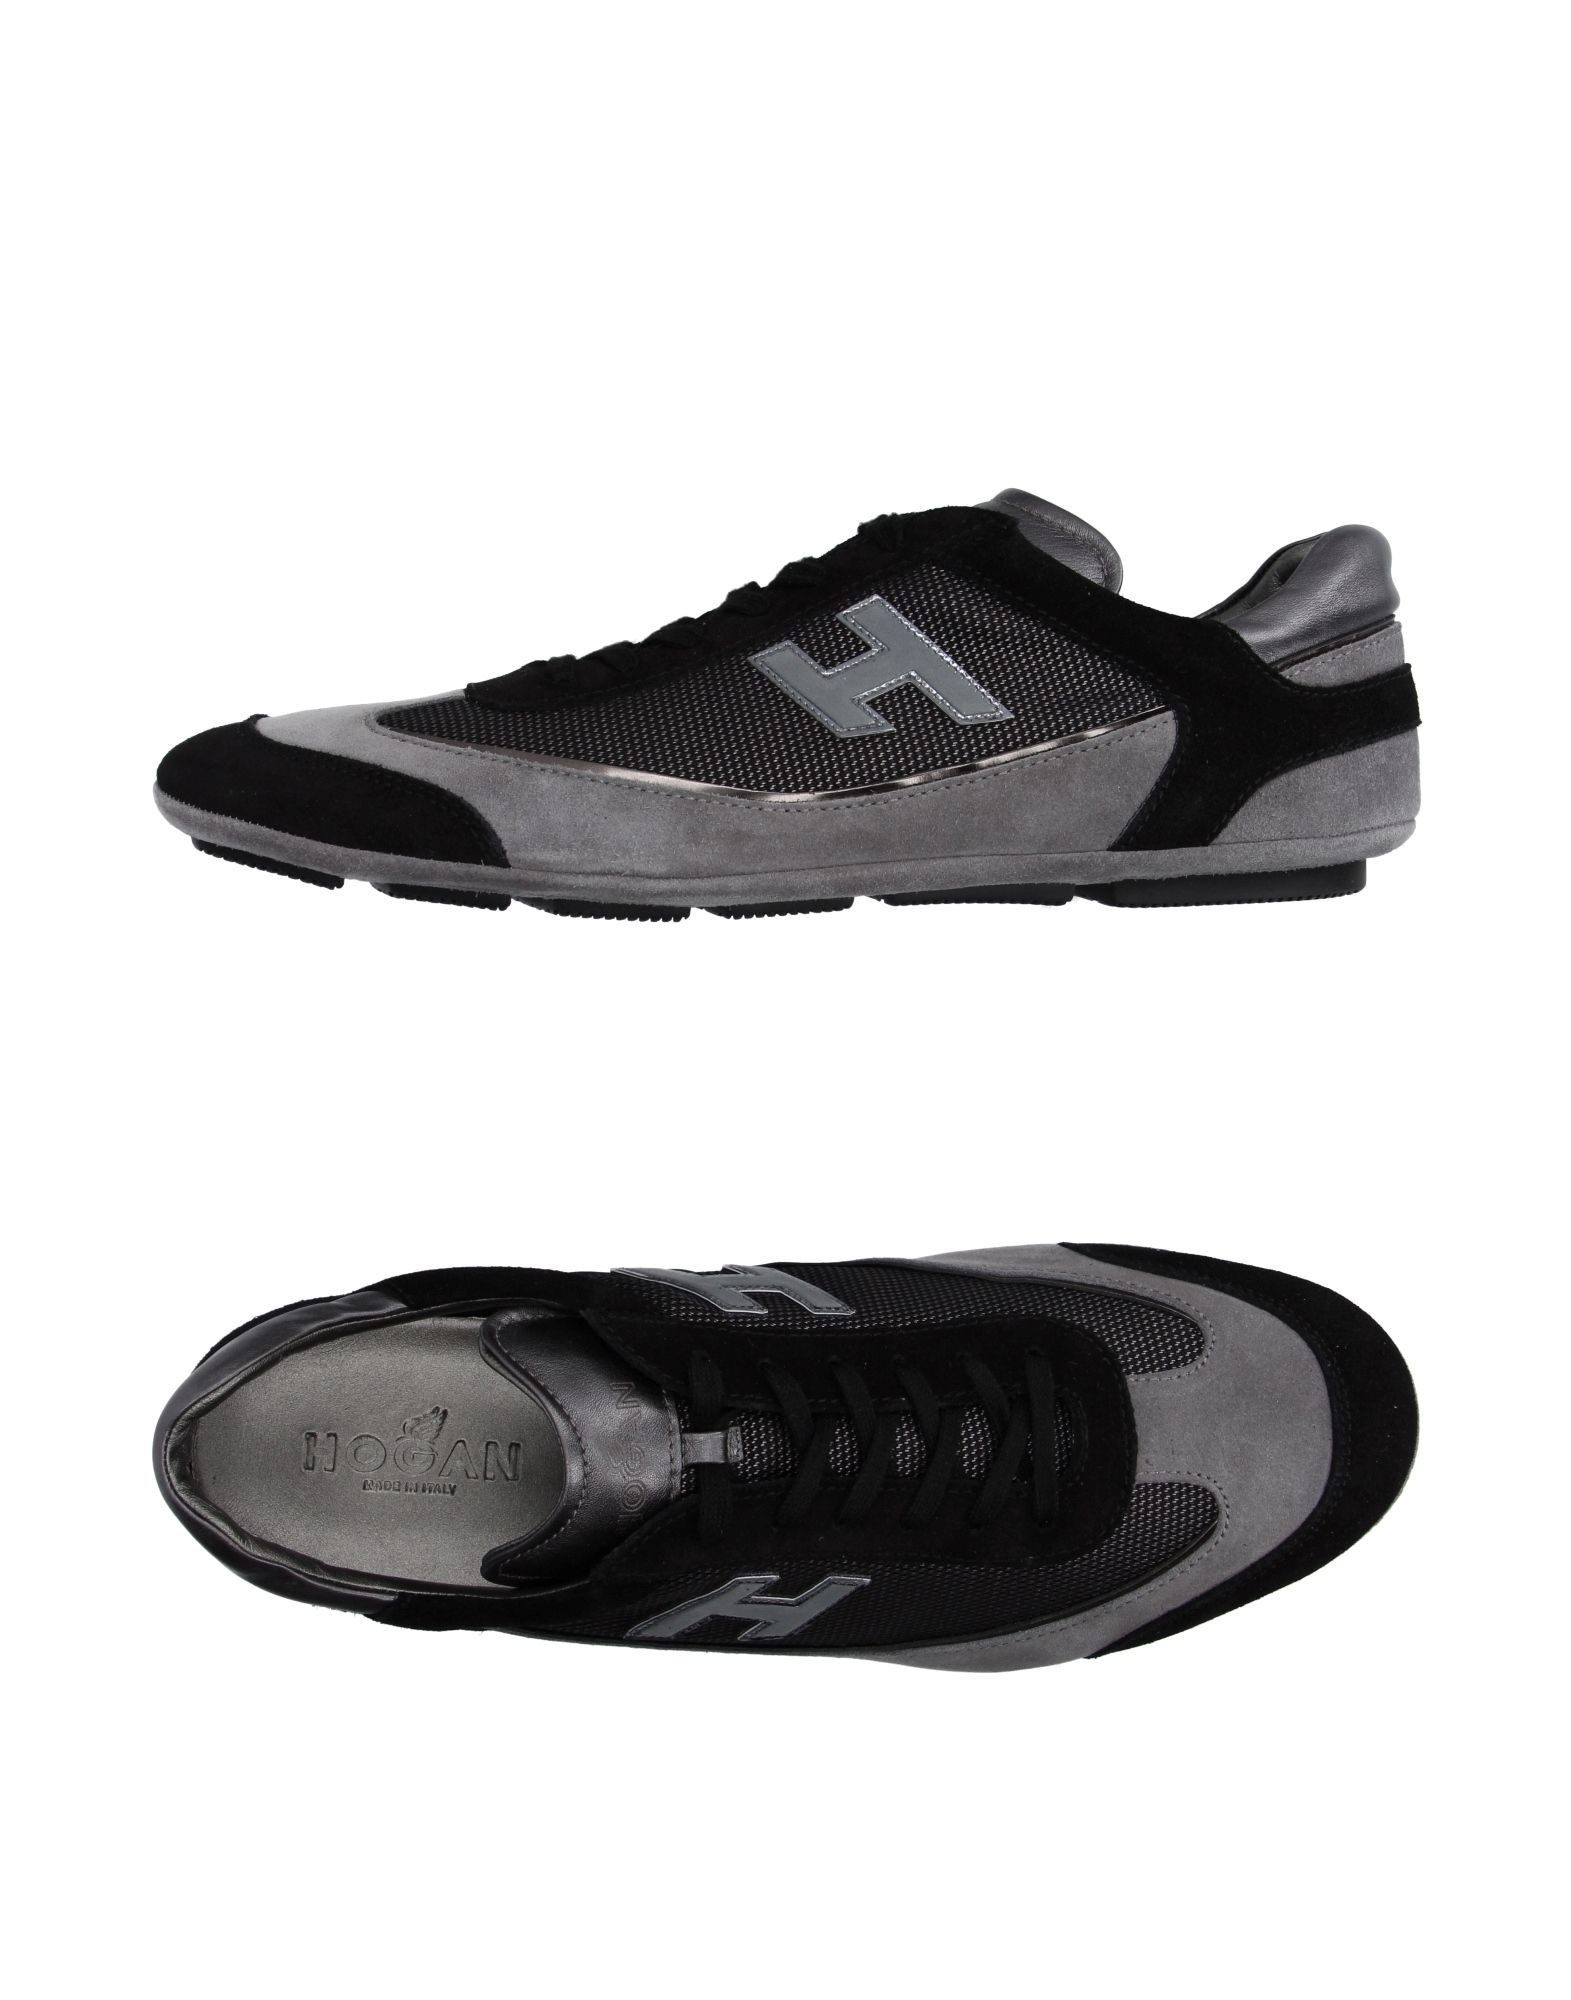 Hogan Low-tops & Trainers in Gray for Men - Lyst